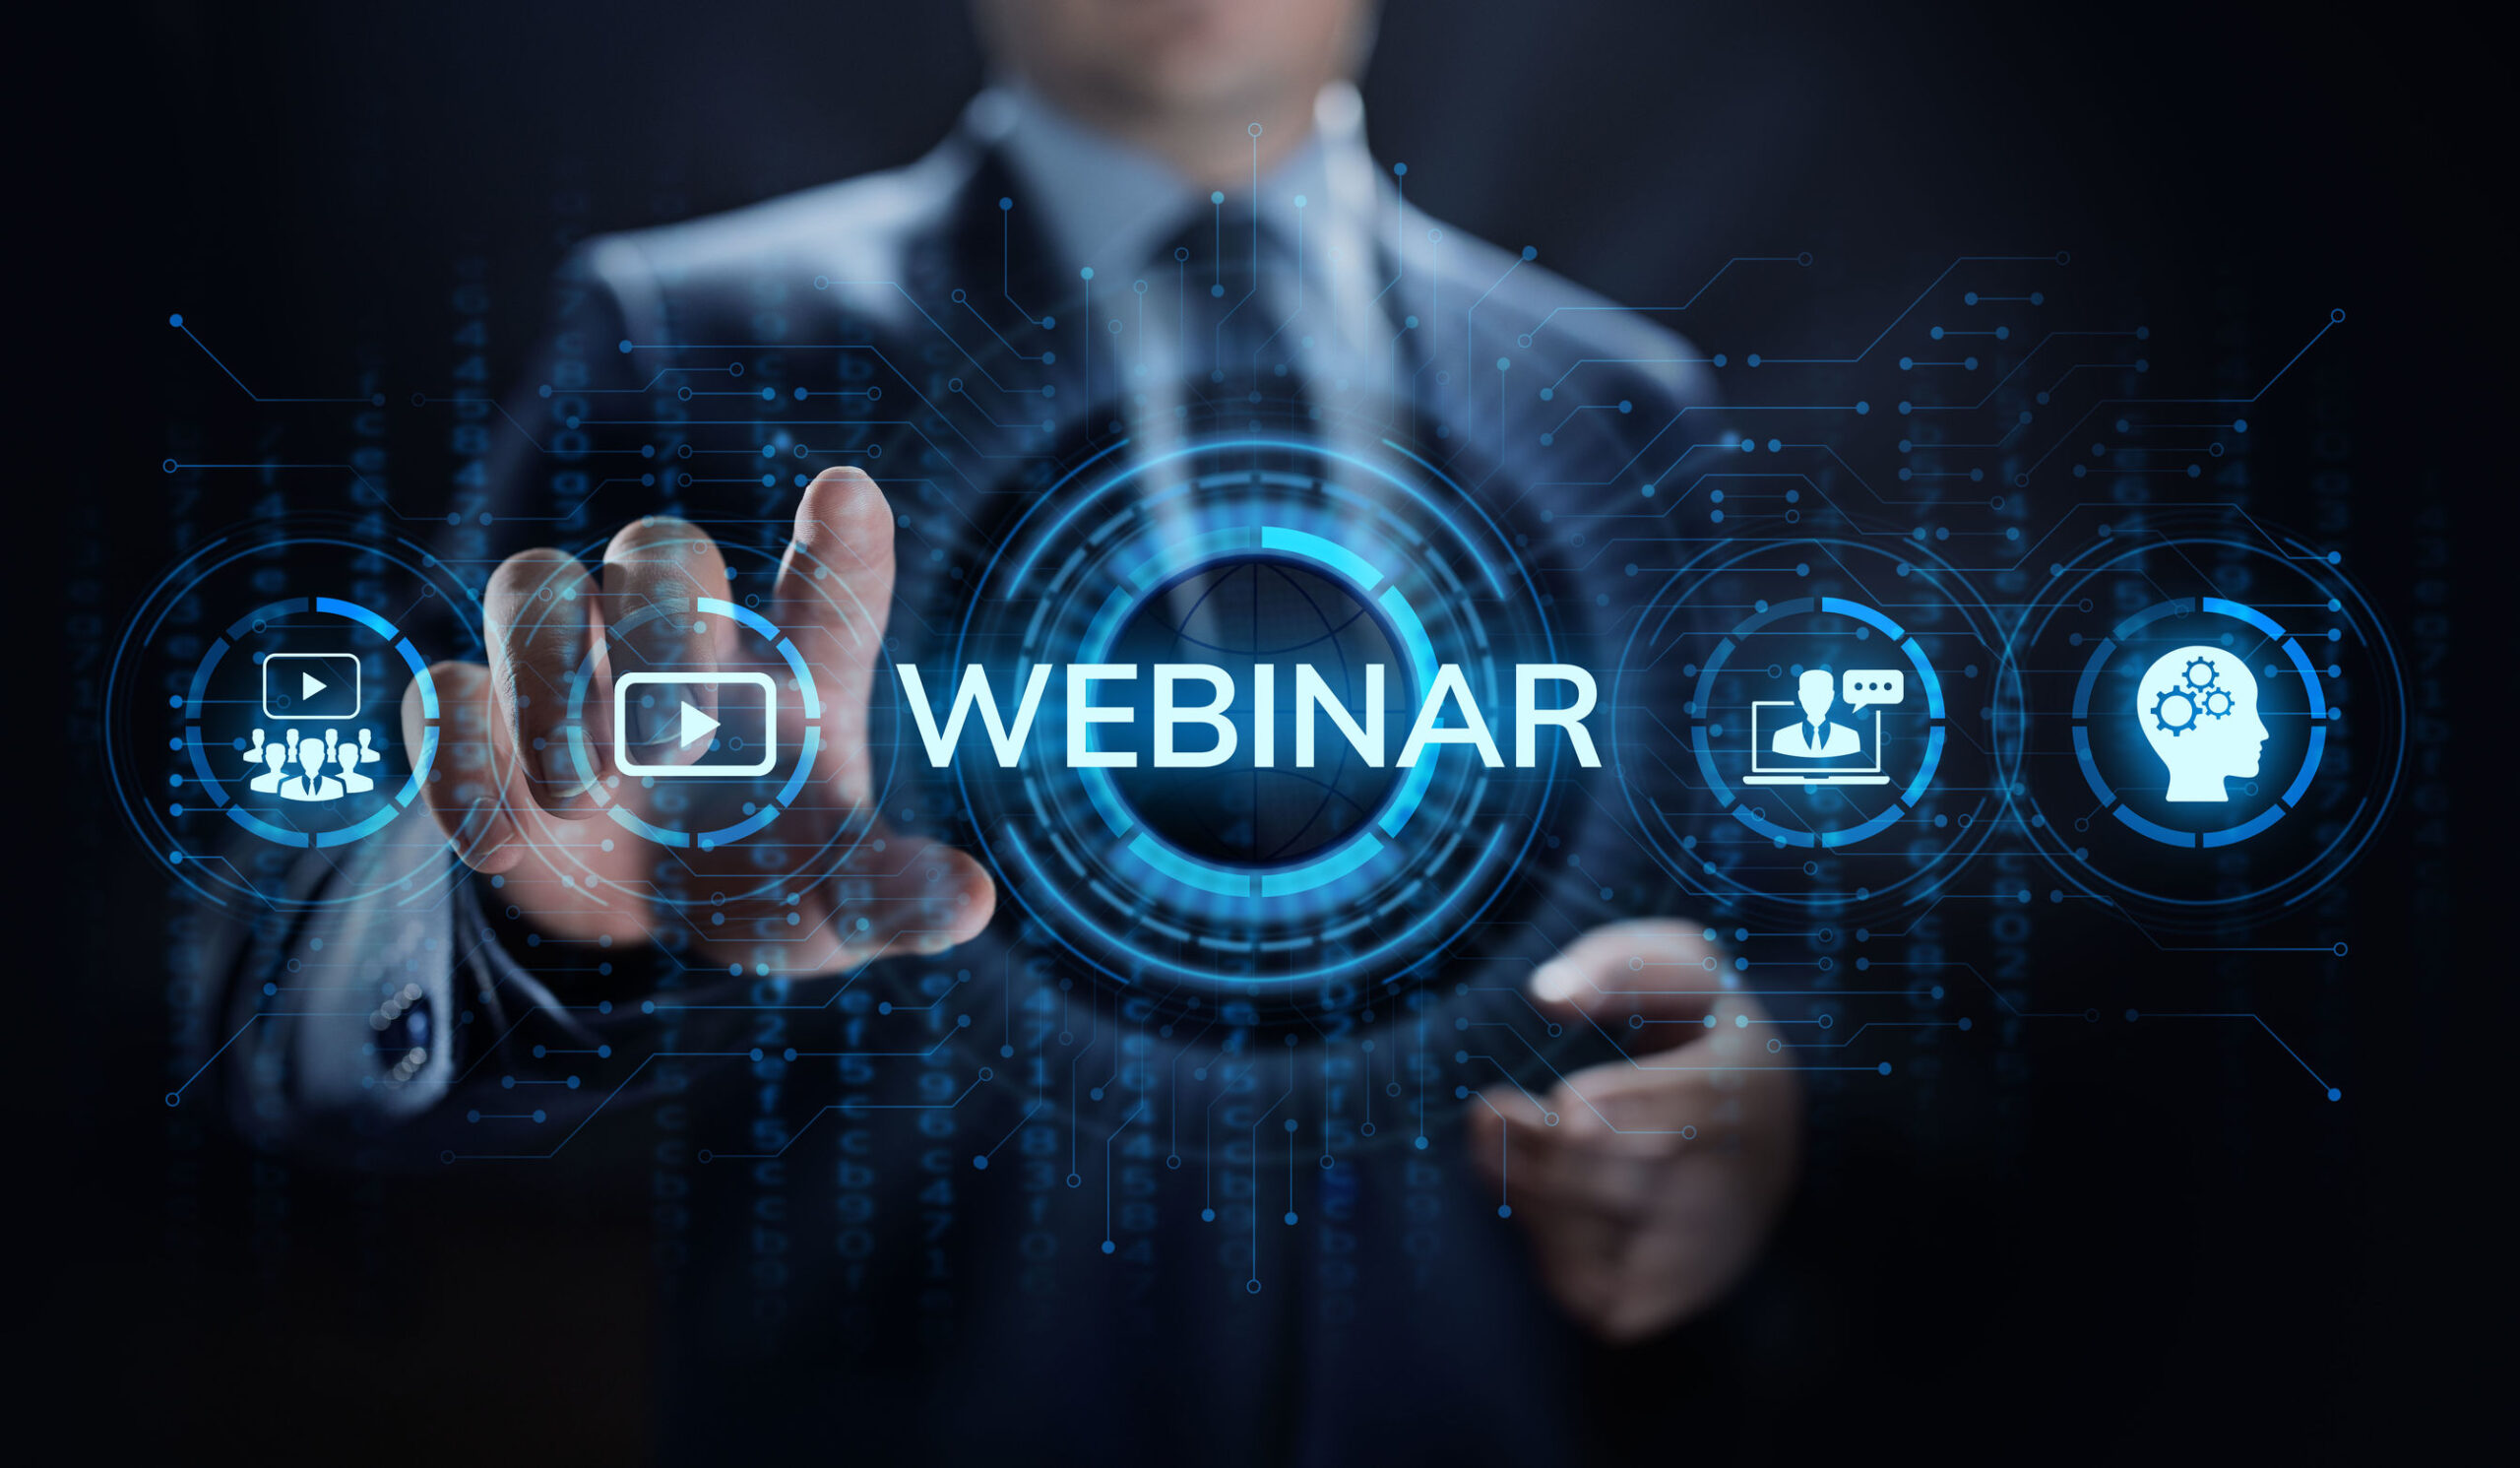 Ring in the New Year with Our January Webinars